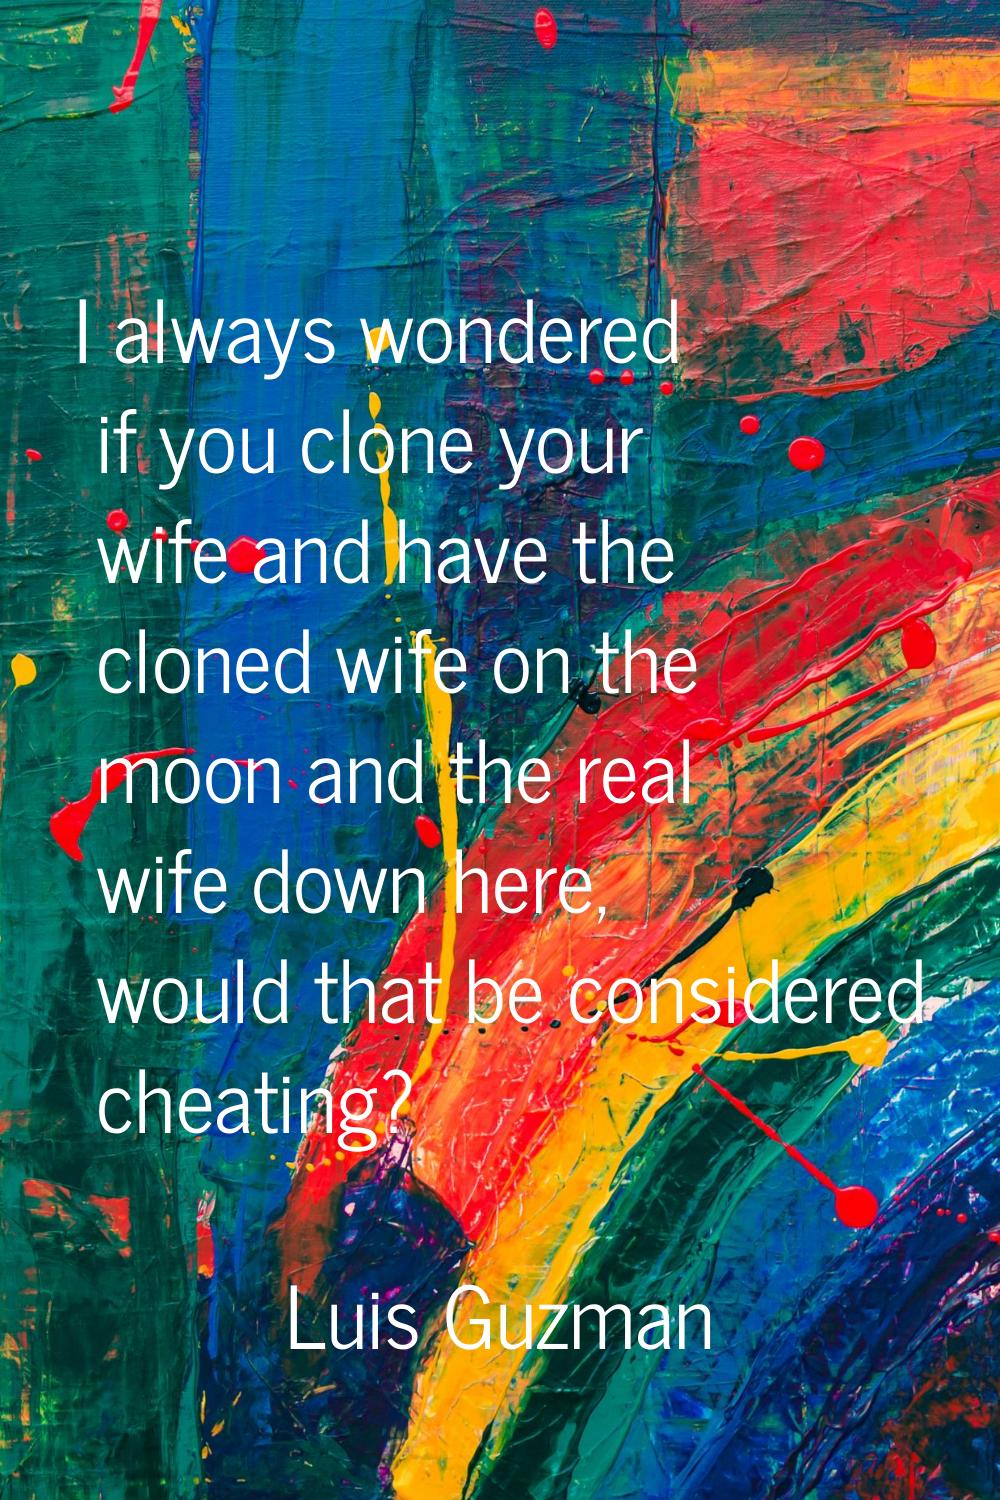 I always wondered if you clone your wife and have the cloned wife on the moon and the real wife dow